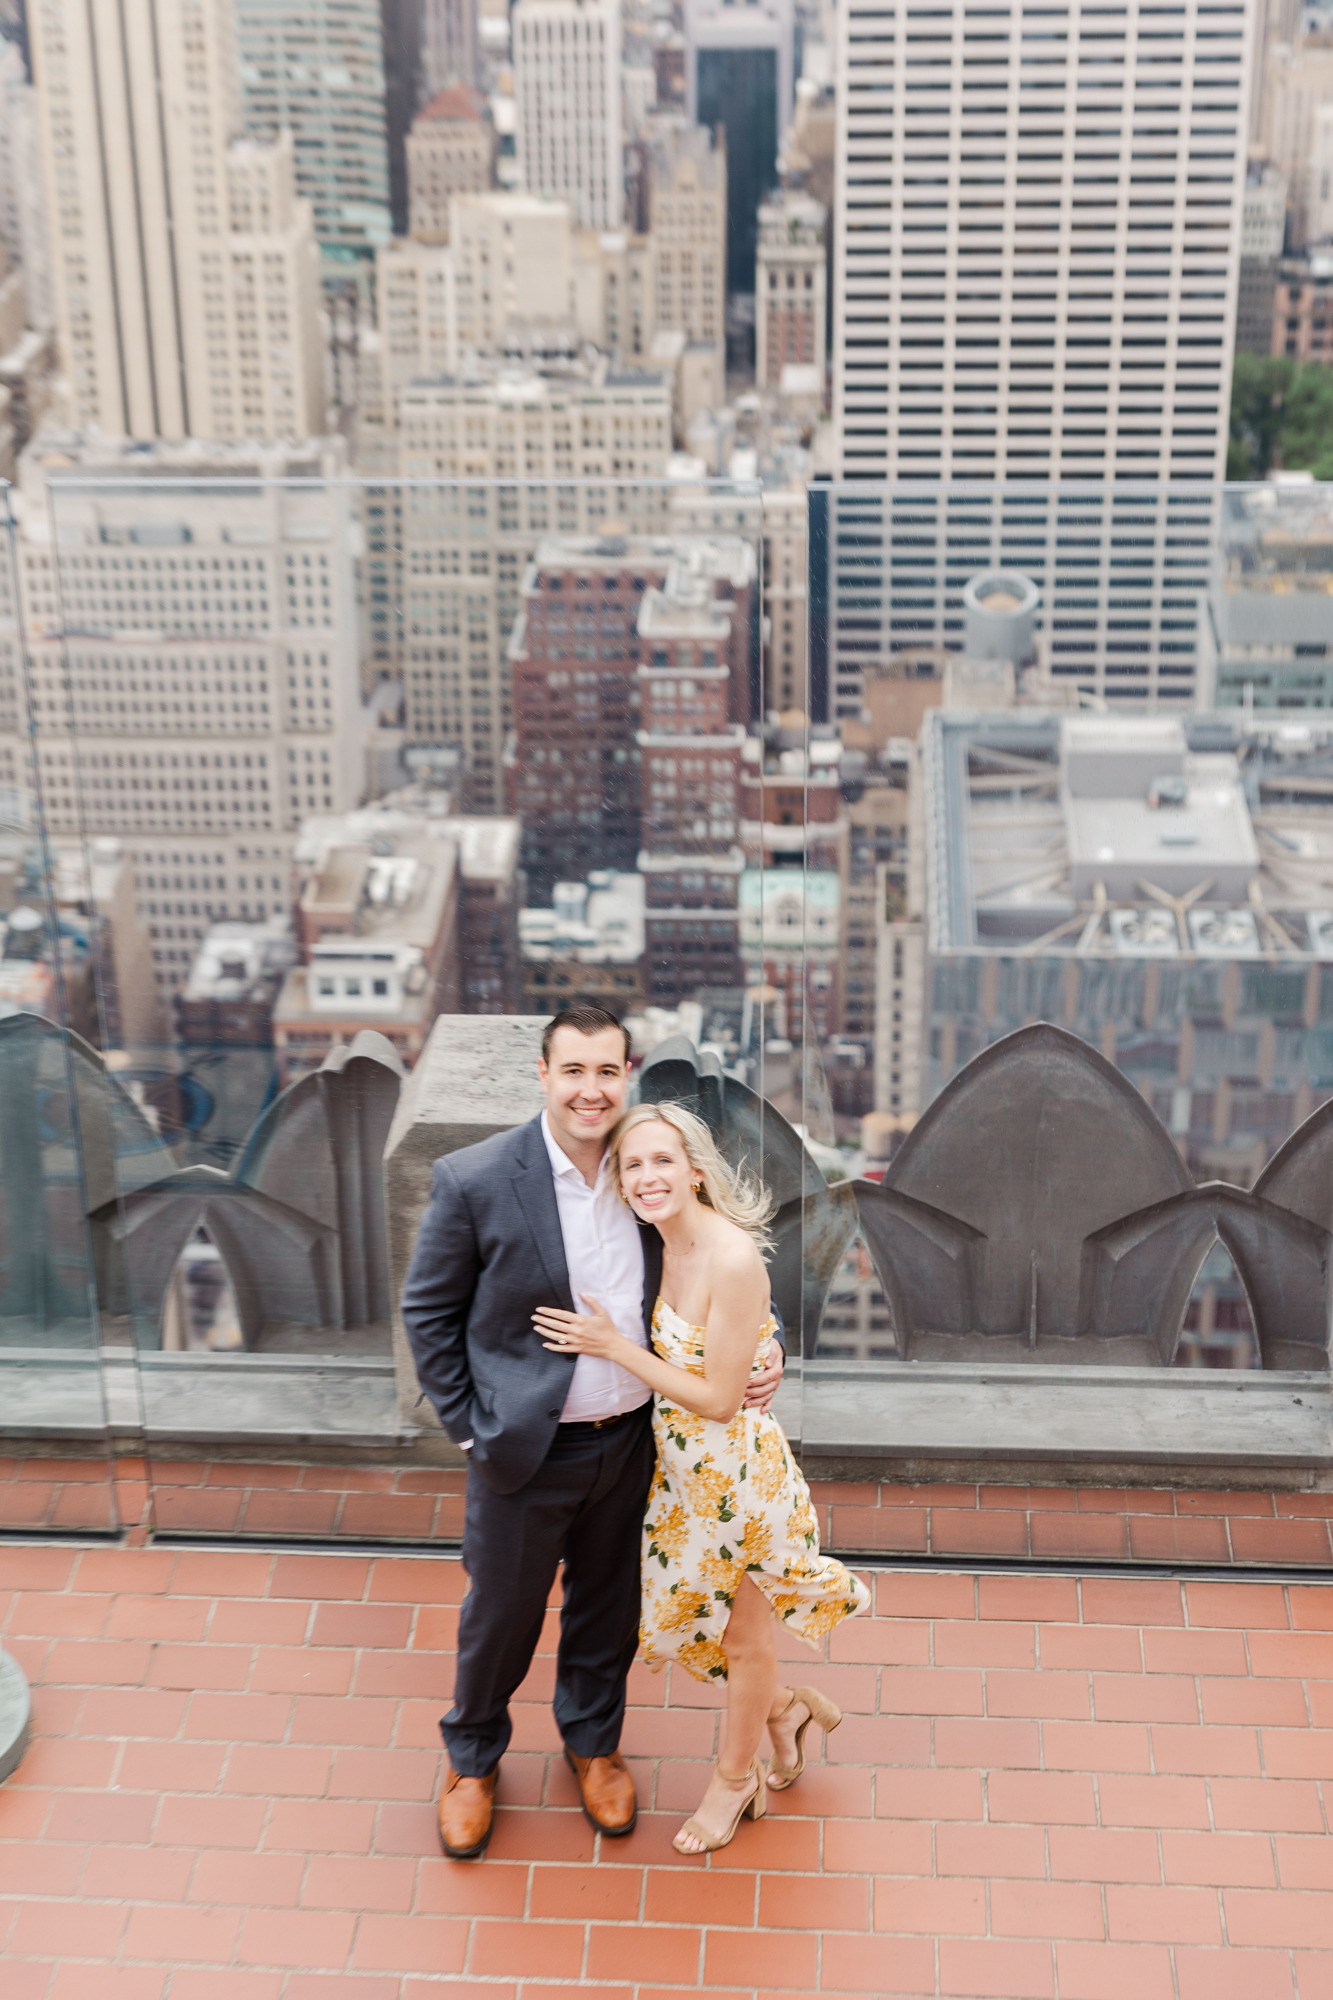 Playful Top of the Rock Engagement Session